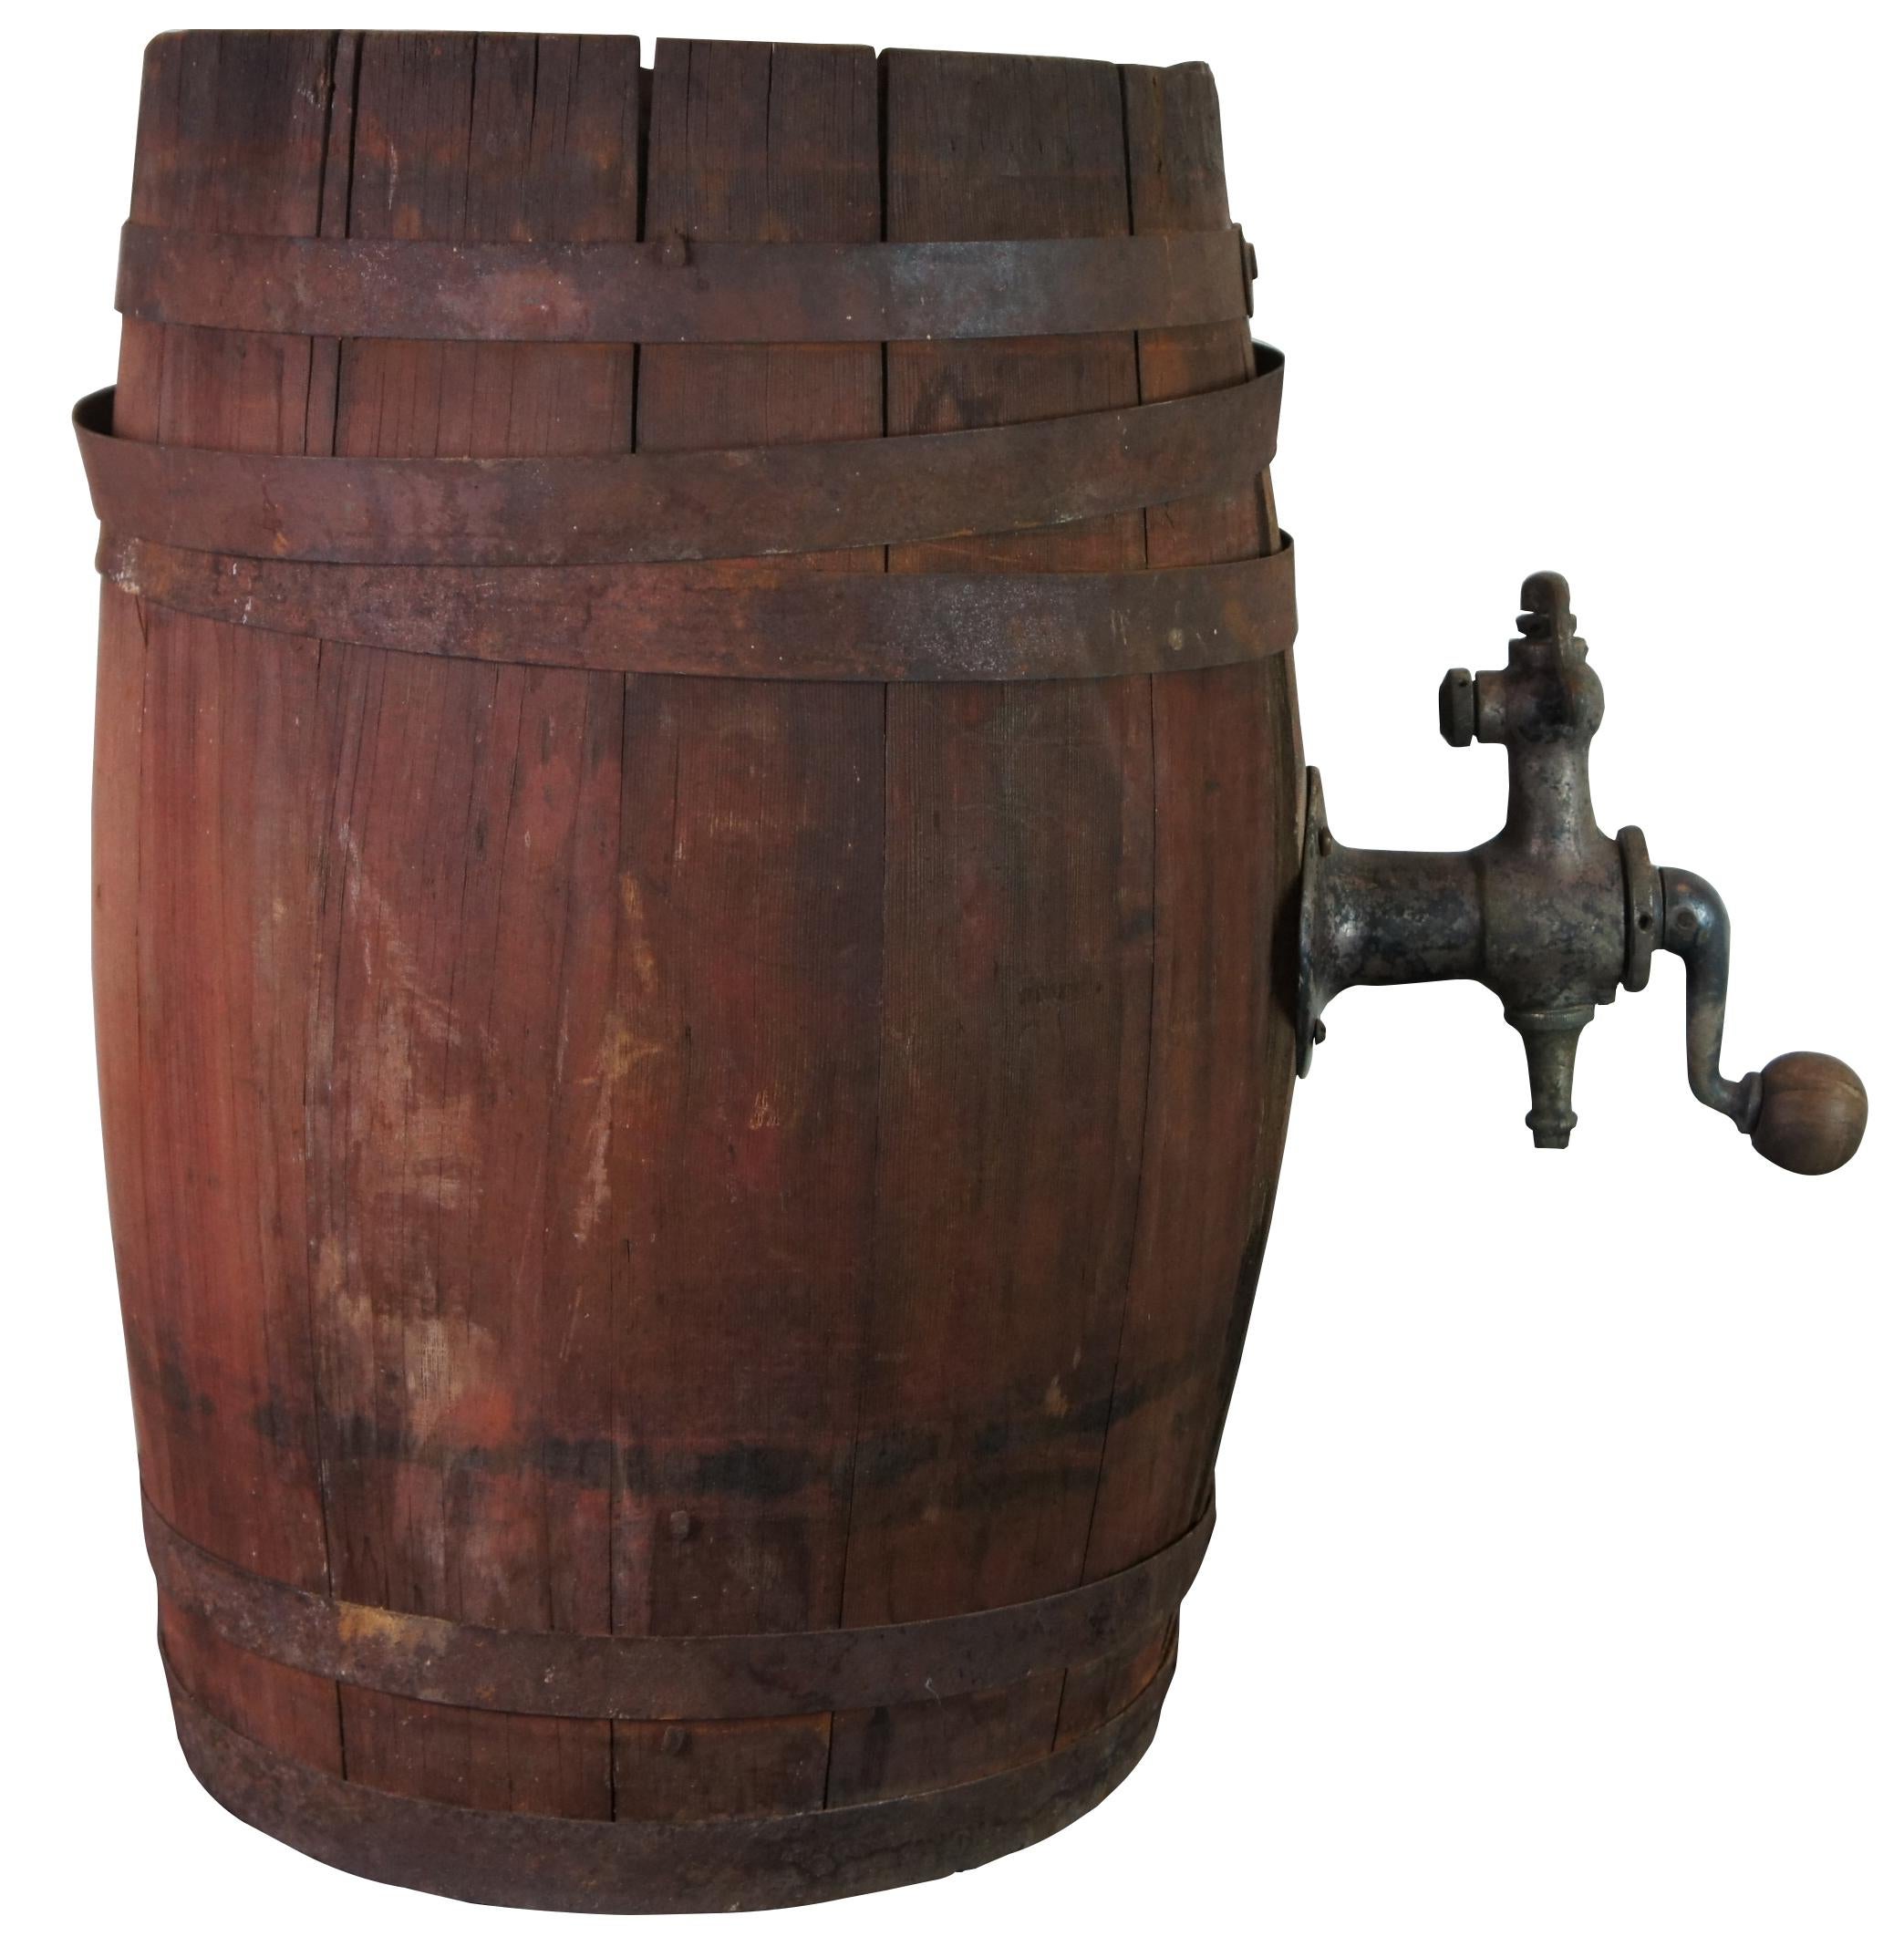 Antique wood iron banded beer or whiskey barrel keg with crank spigot.
   